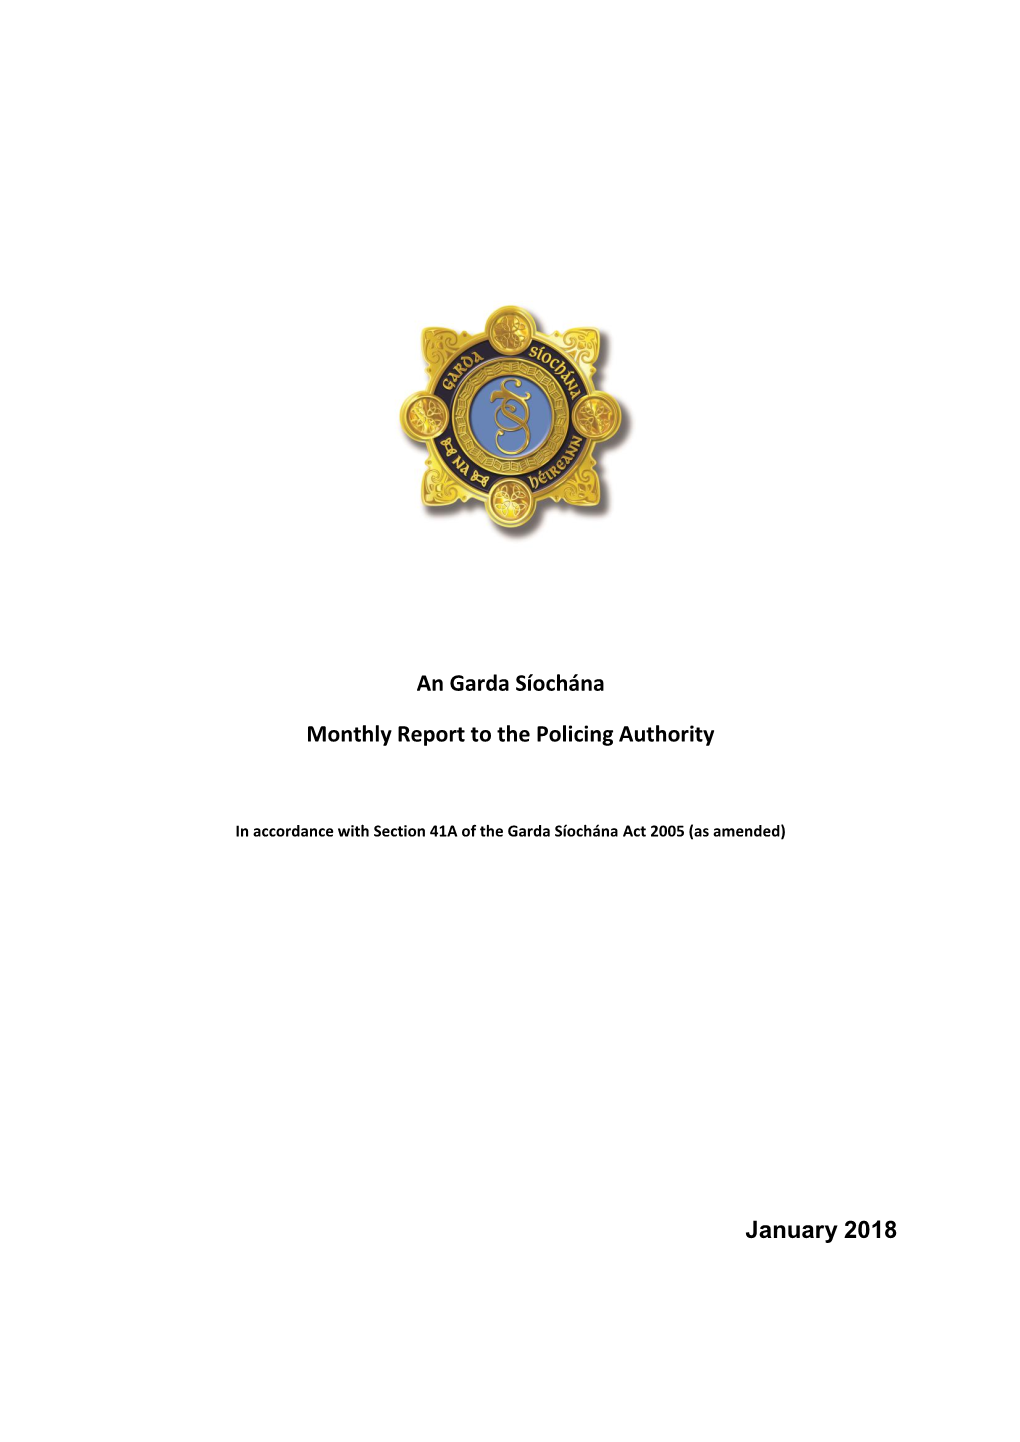 An Garda Síochána Monthly Report to the Policing Authority January 2018